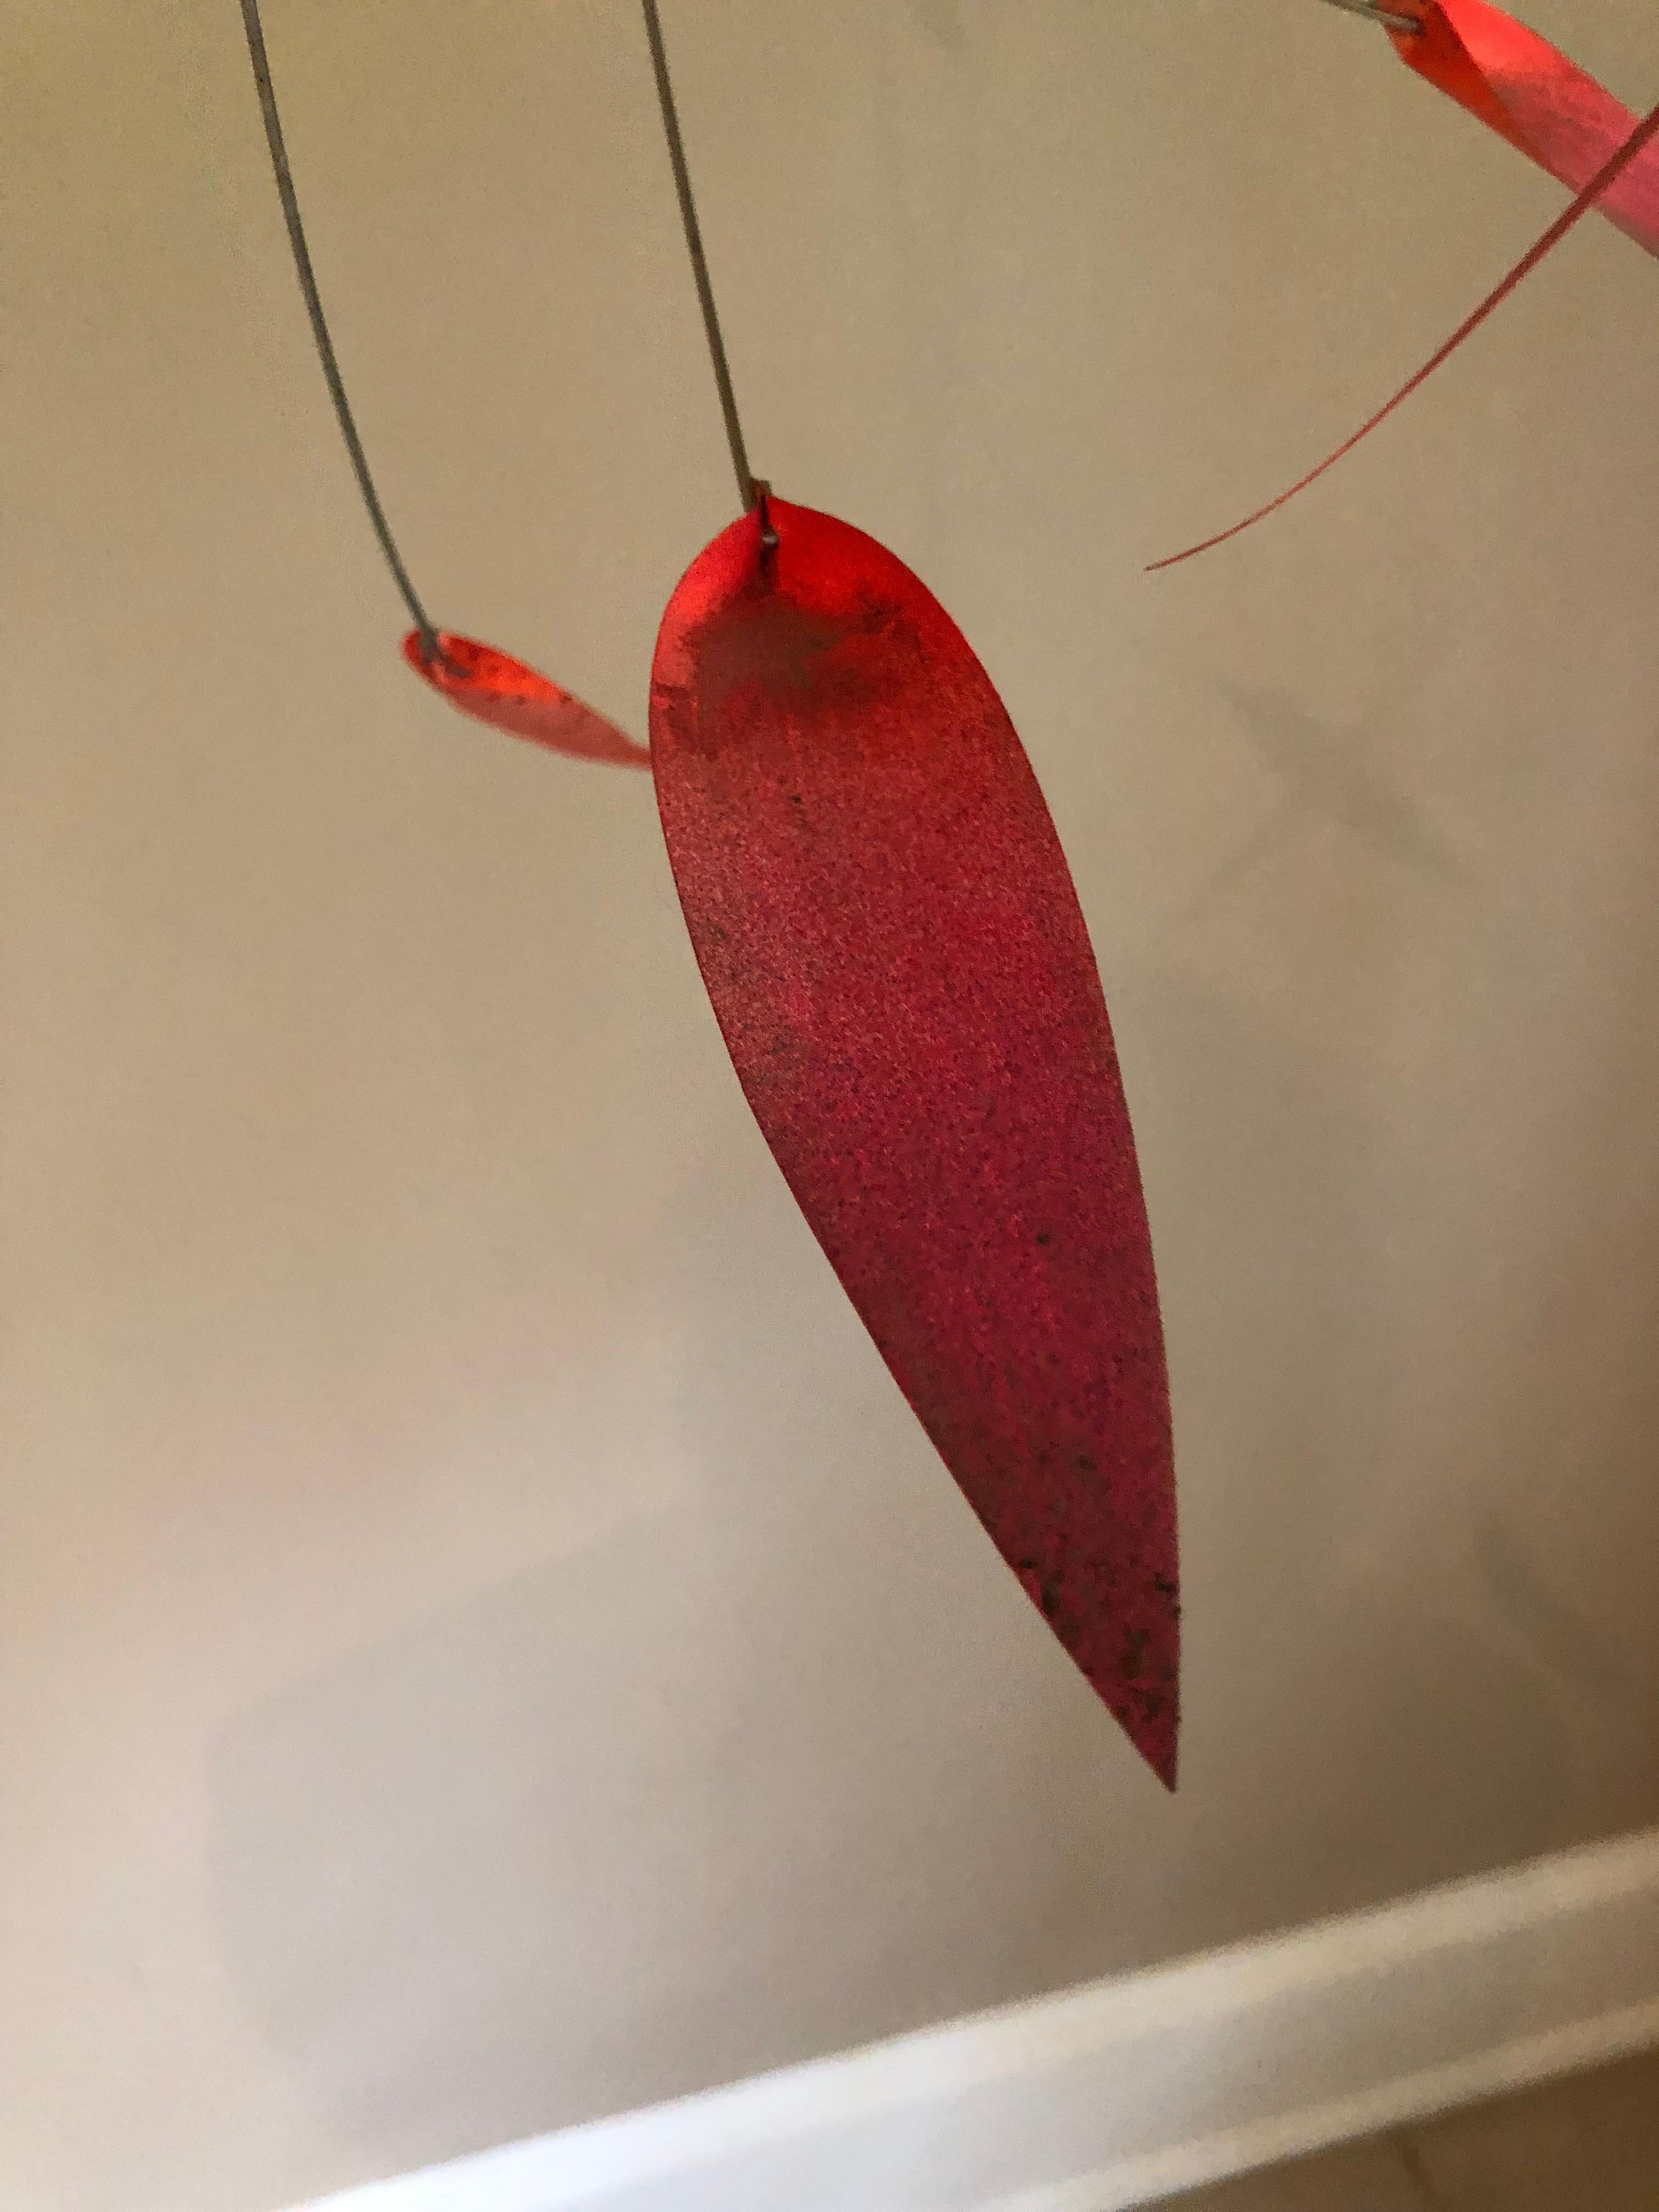 North American Mid-Century Modern Kinetic Mobile Sculpture in Red